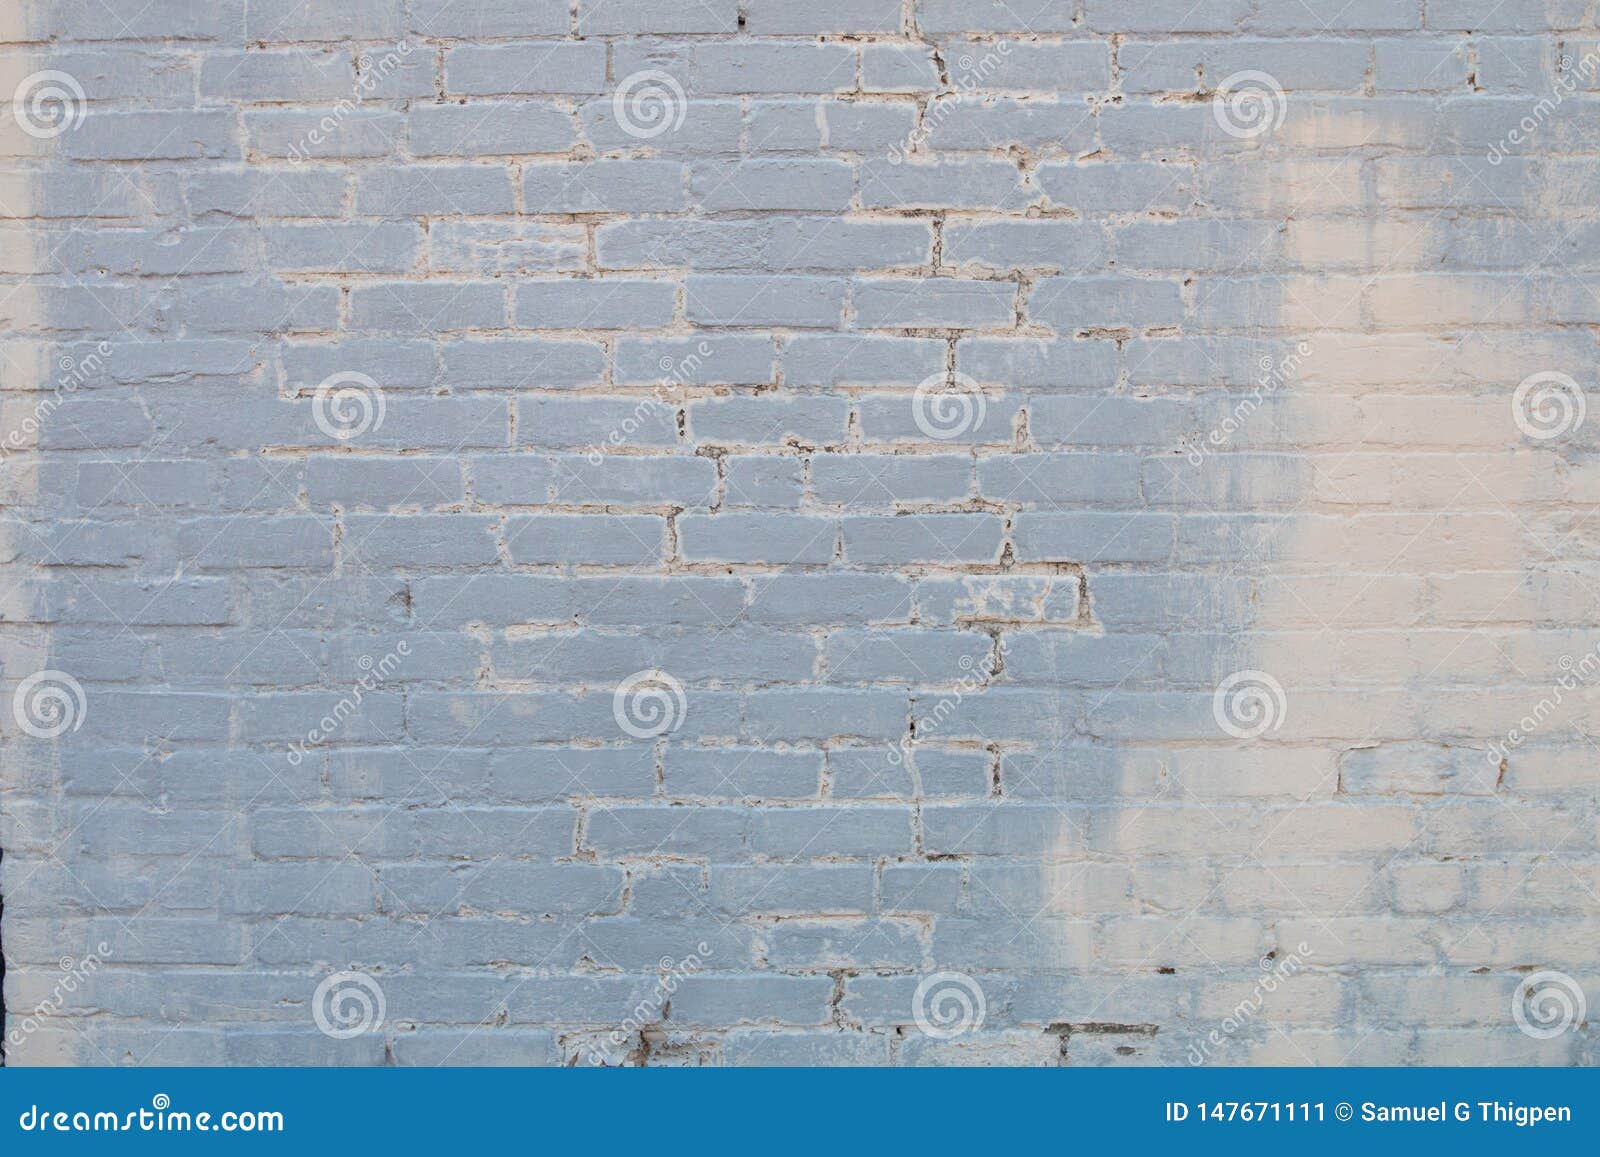 White Brick Wall In Focus Stock Image Image Of Photoshops